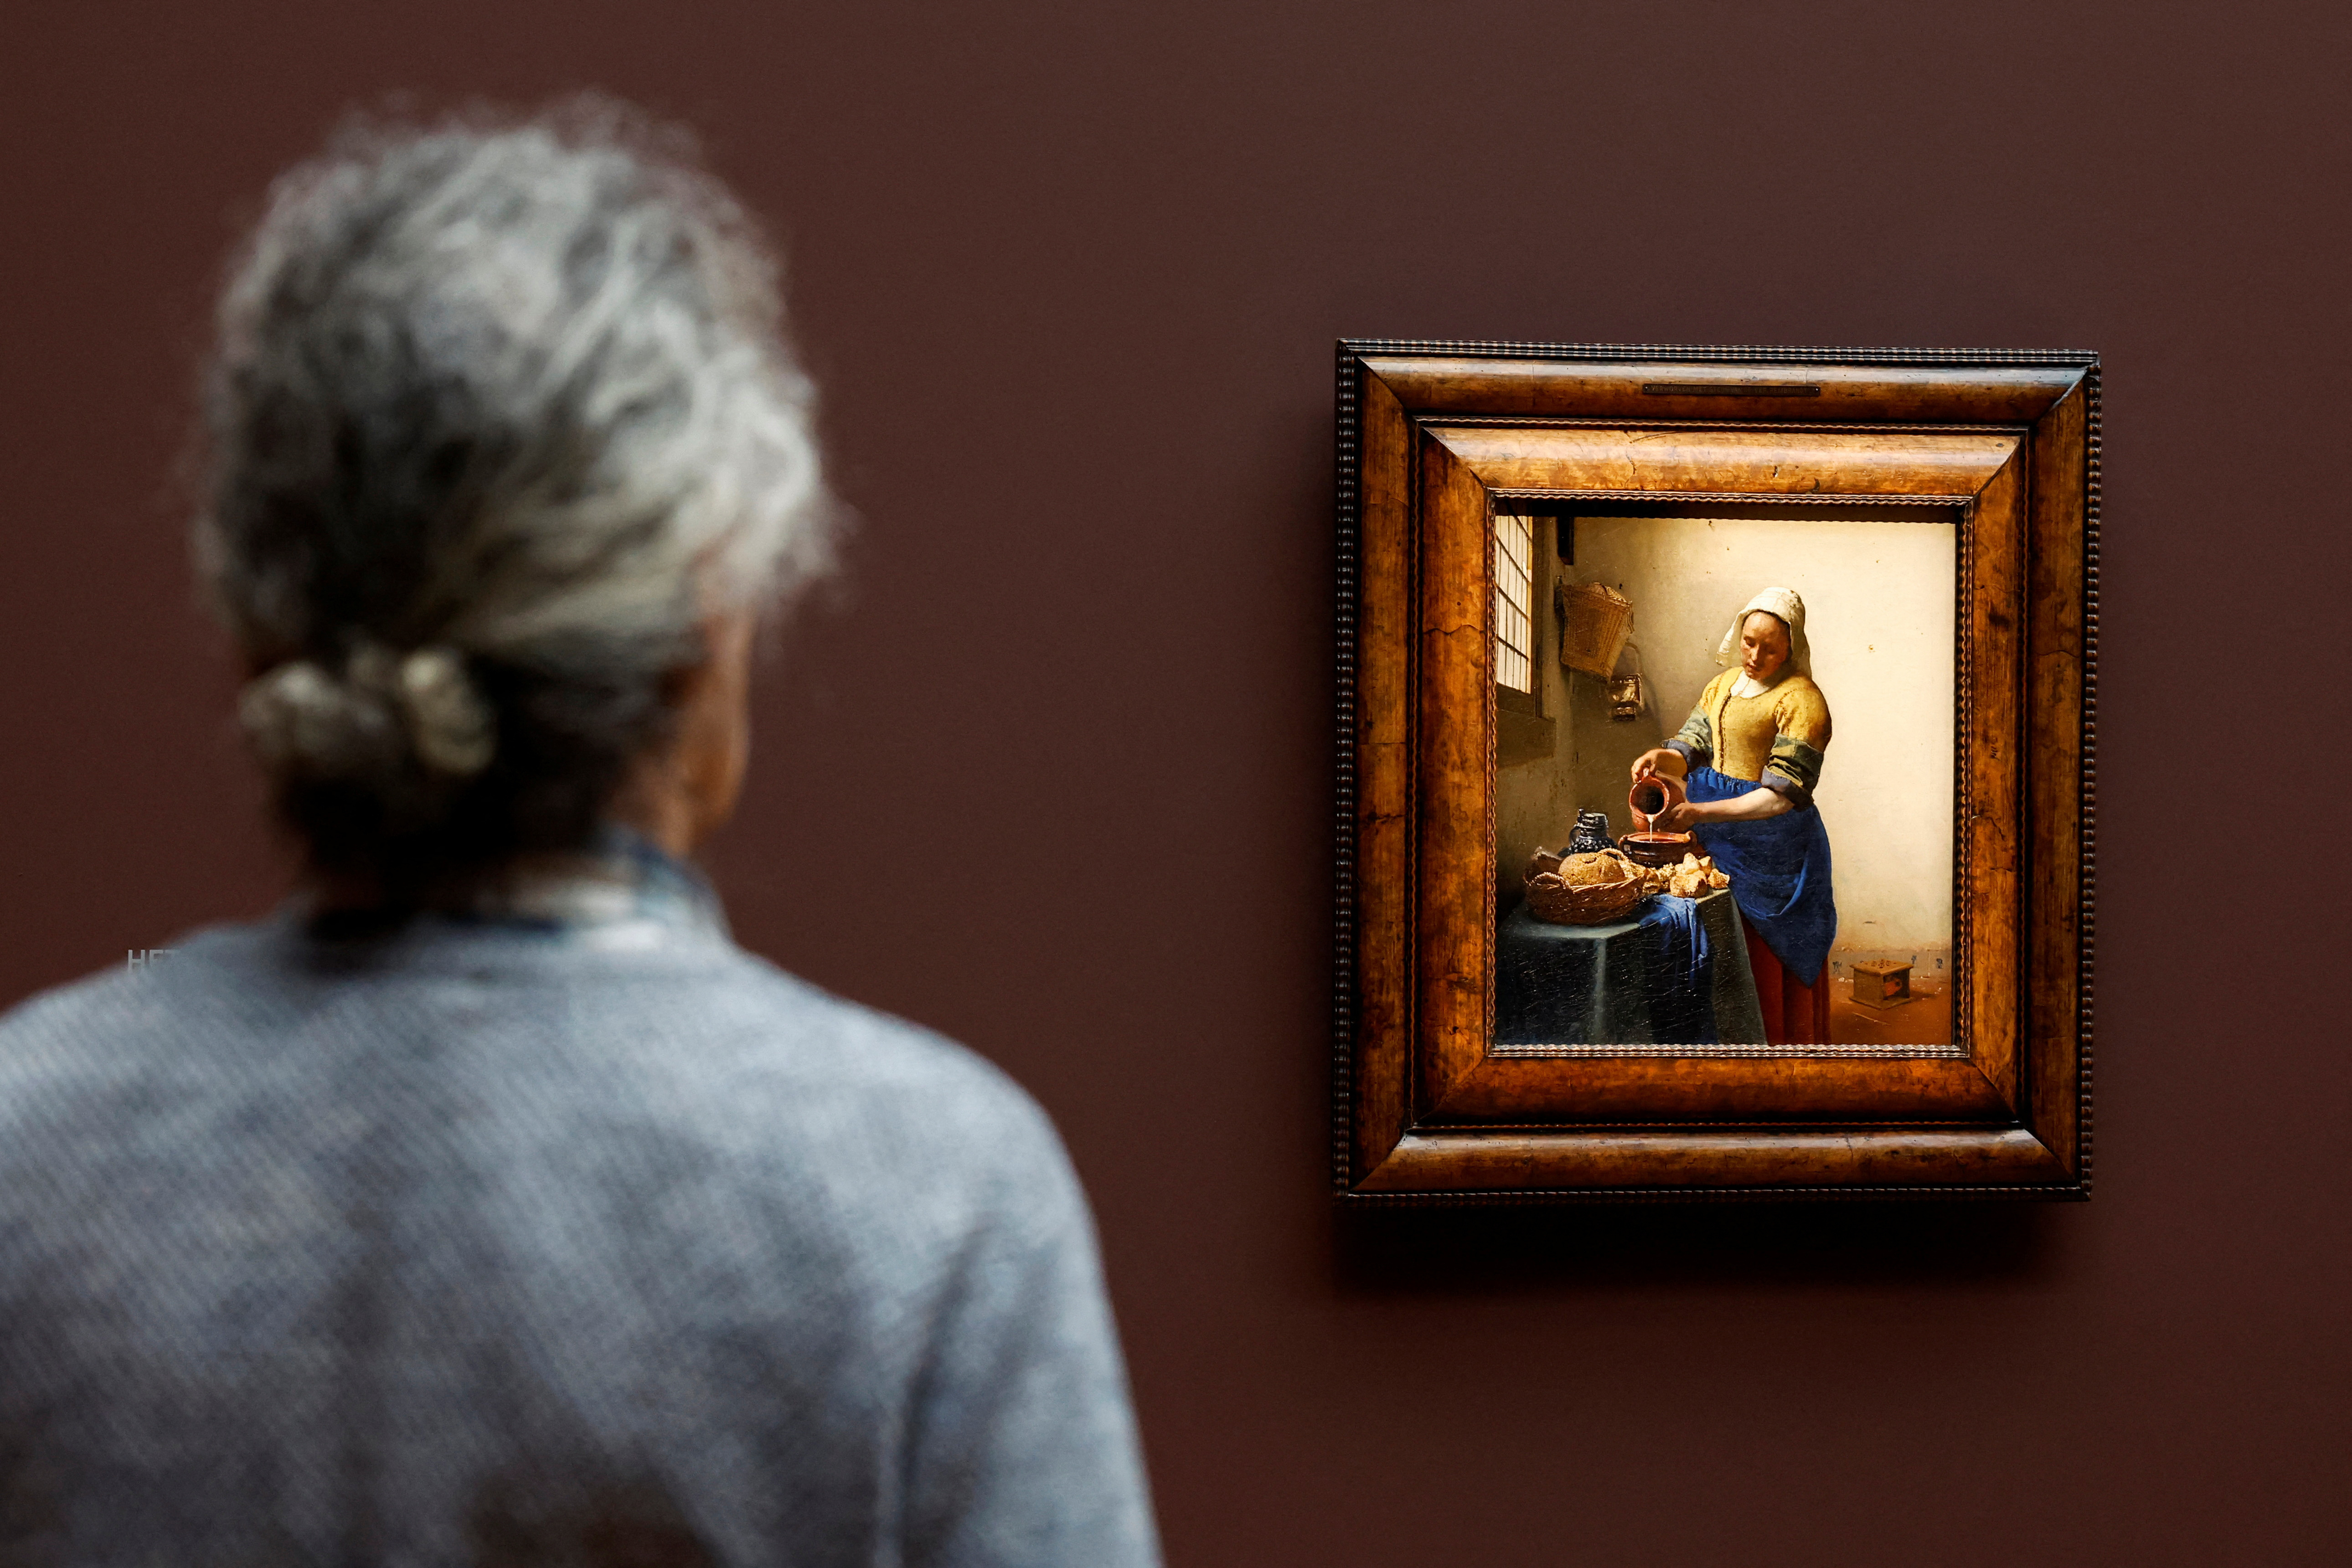 A man looks at Vermeer's painting 'The Milkmaid' at an exhibition bringing together 28 works by Dutch painter Johannes Vermeer